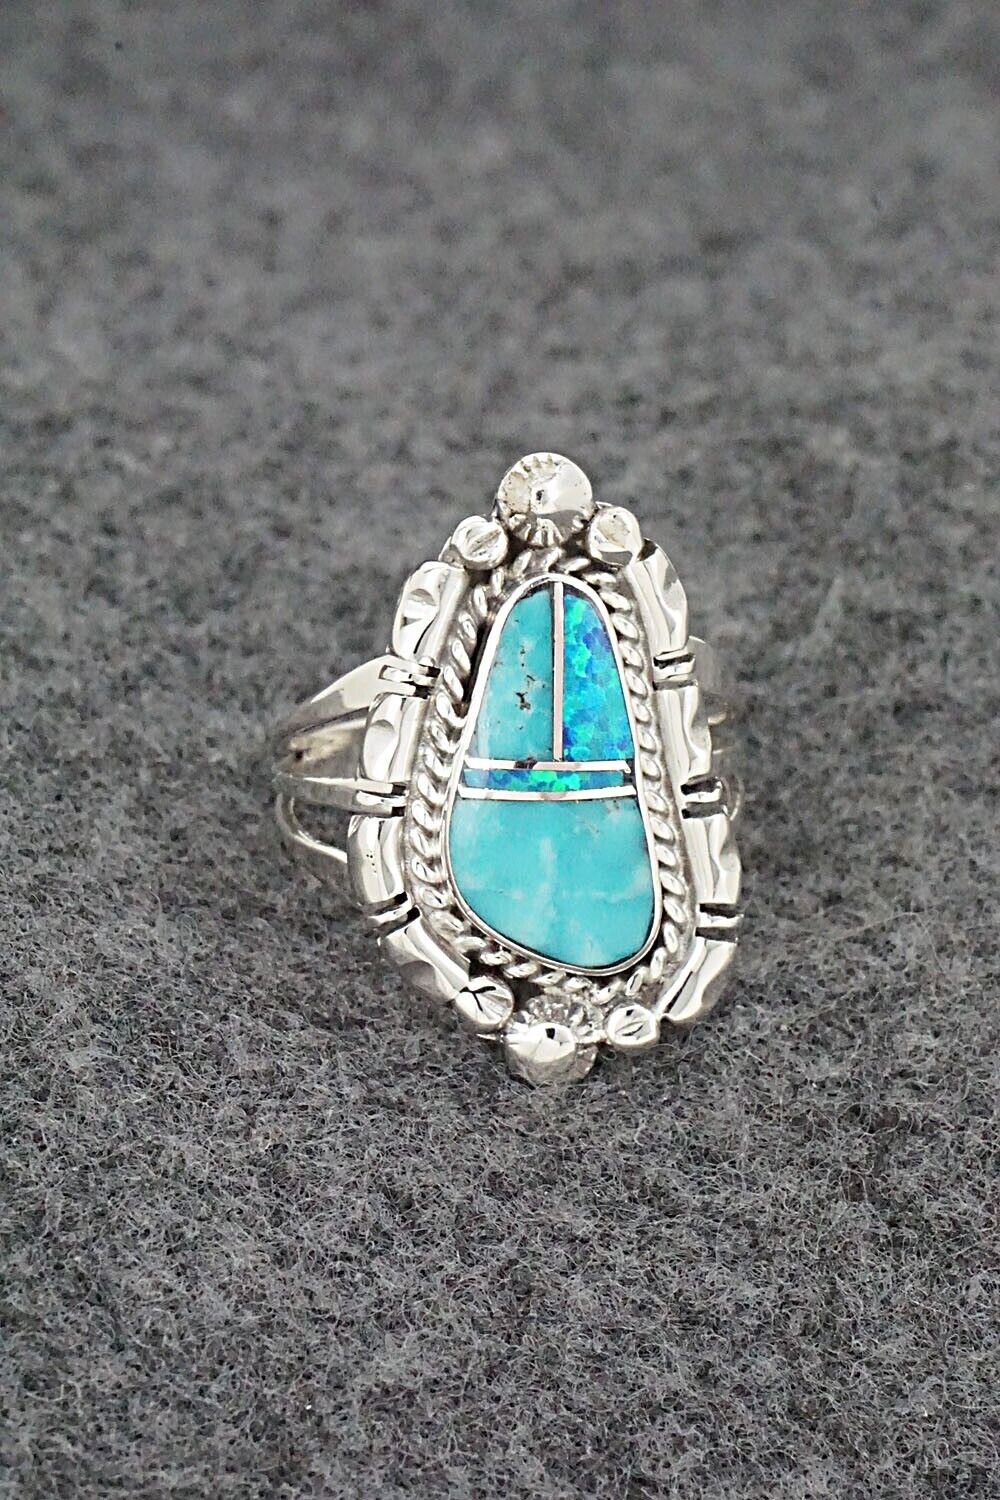 Turquoise, Opalite & Sterling Silver Ring - James Manygoats - Size 7.5